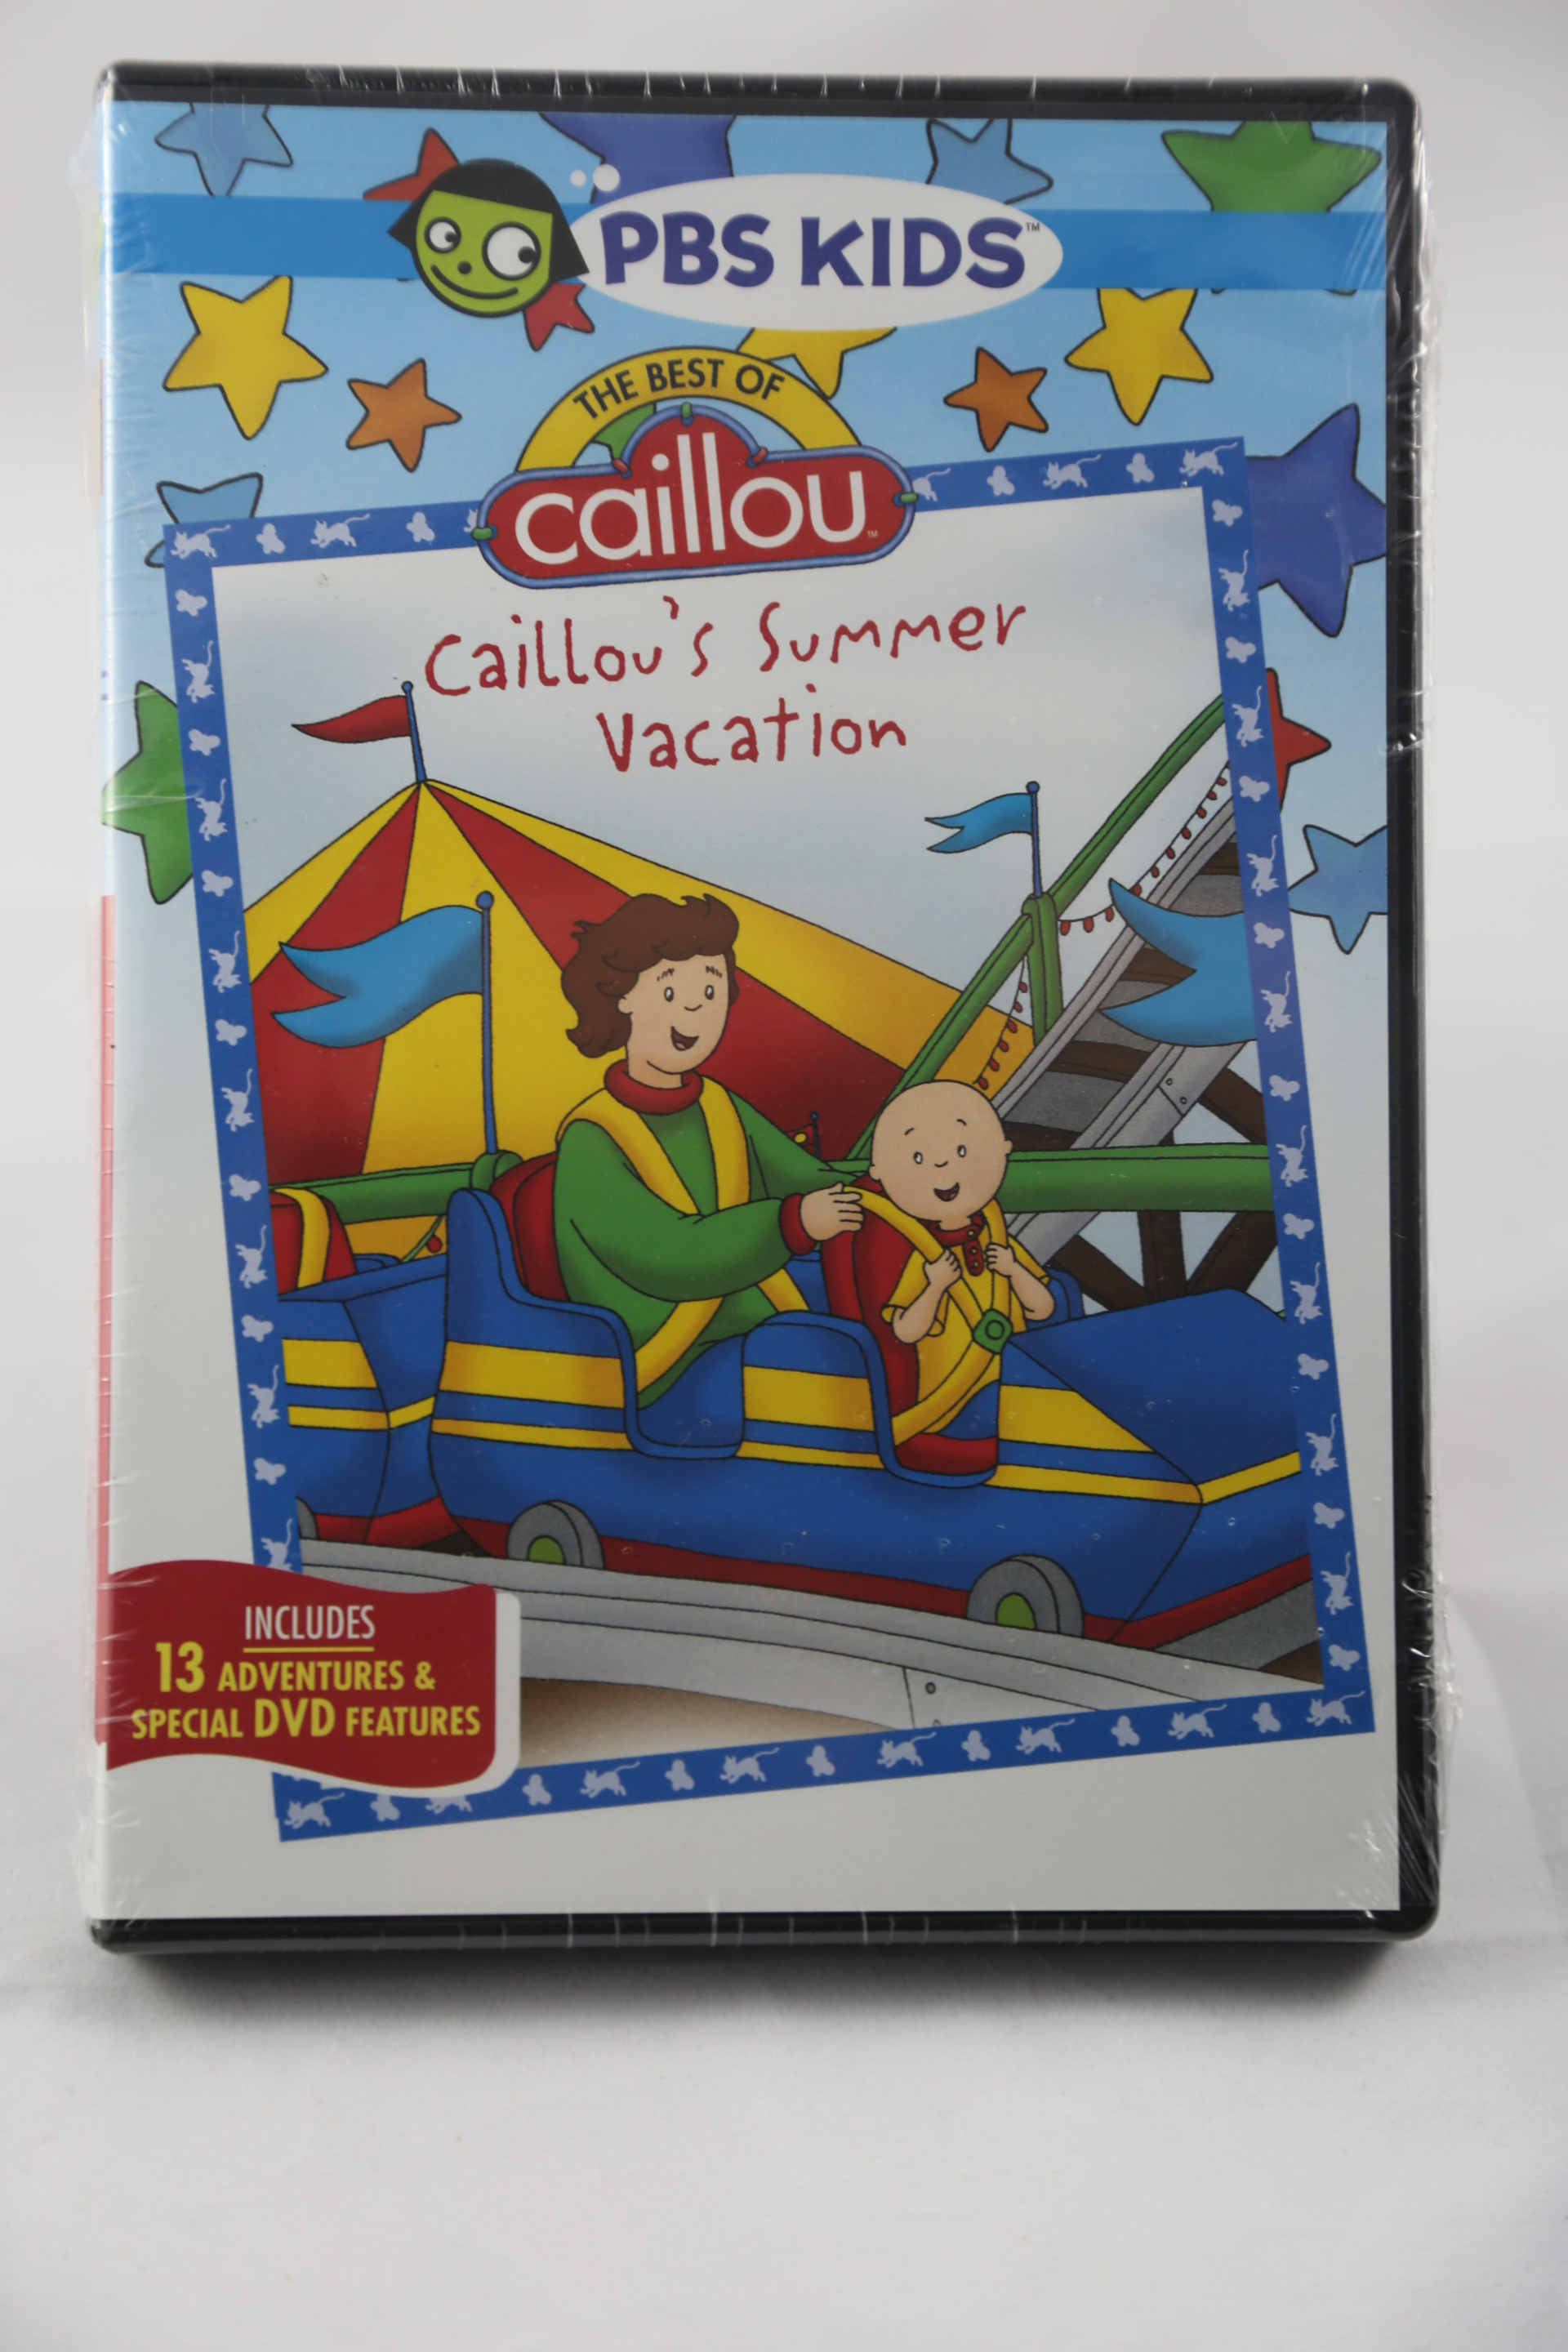 Cailloubest Of Caillou Caillous Sum throughout proportions 1920 X 2880